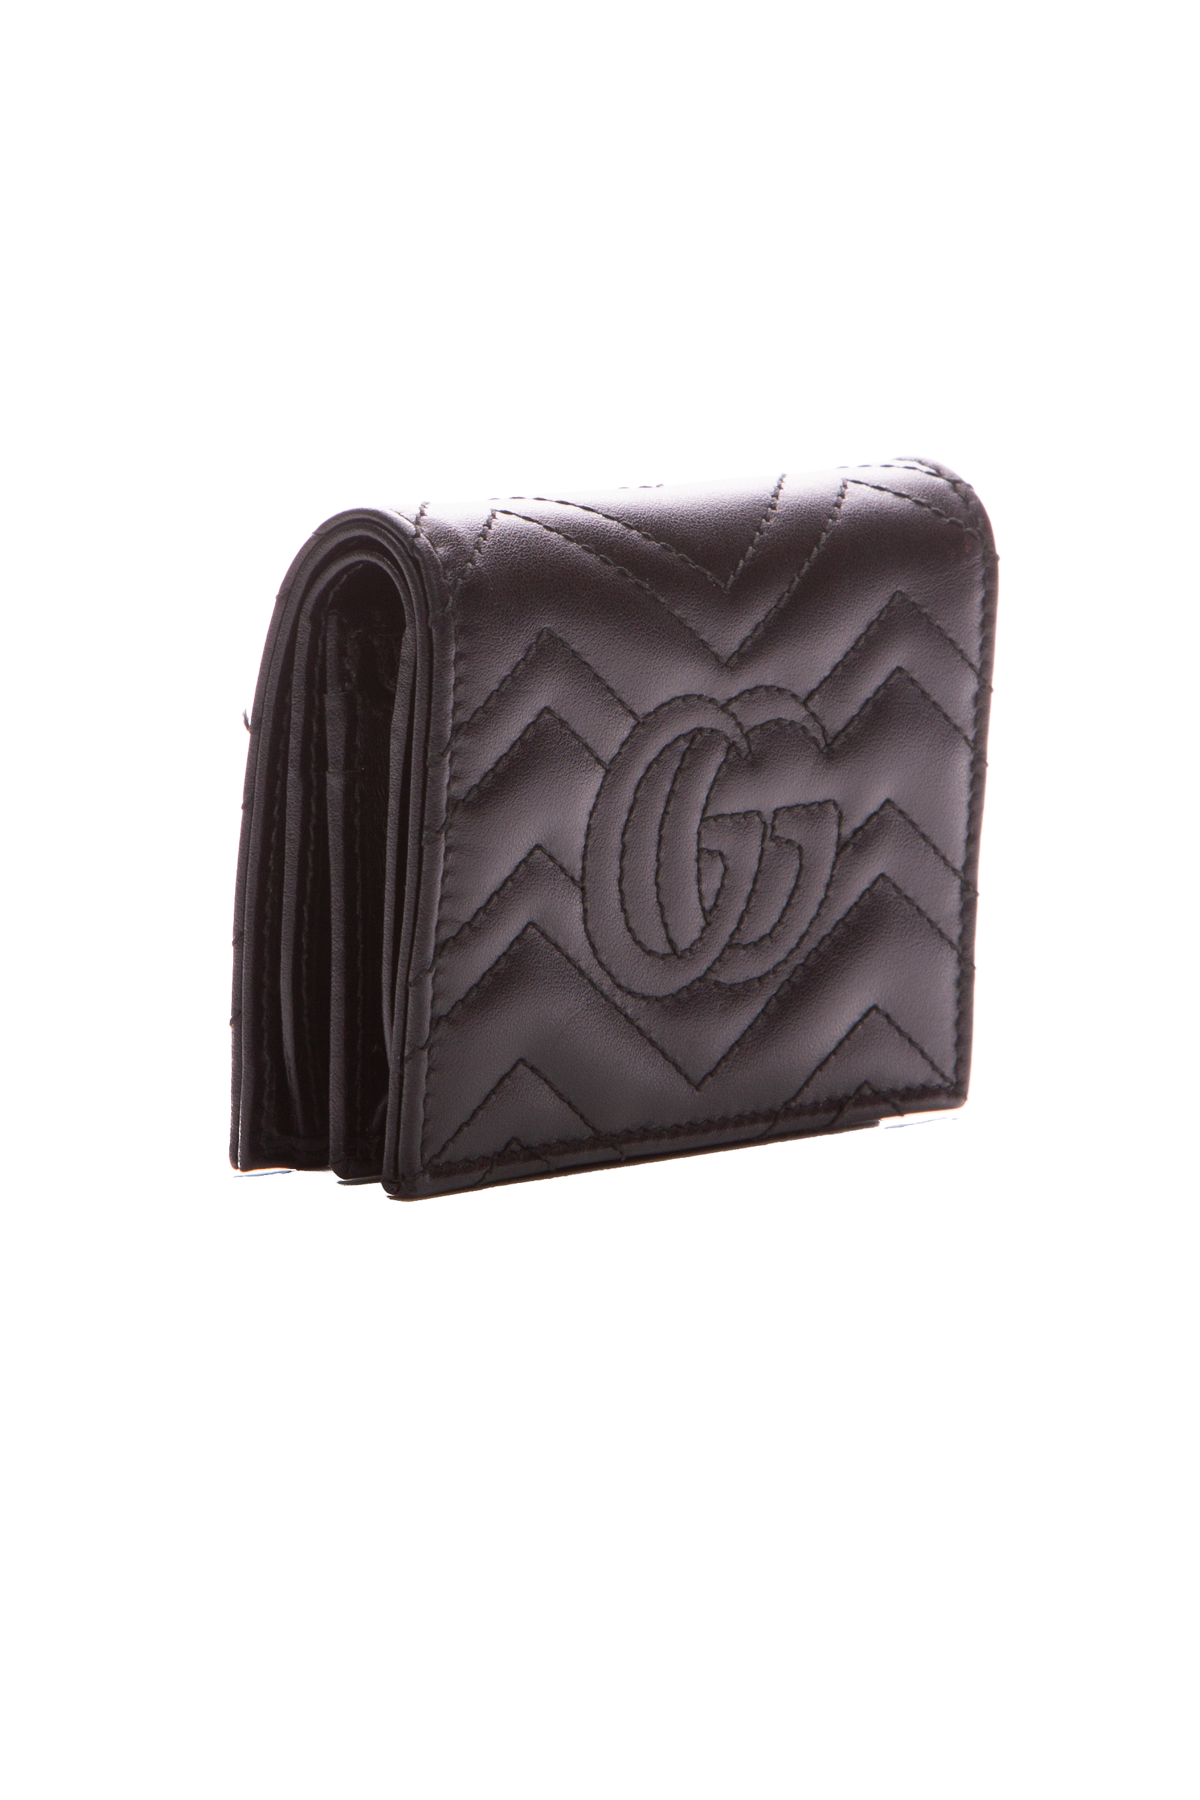 Gucci Marmont Card Case Wallet Media 